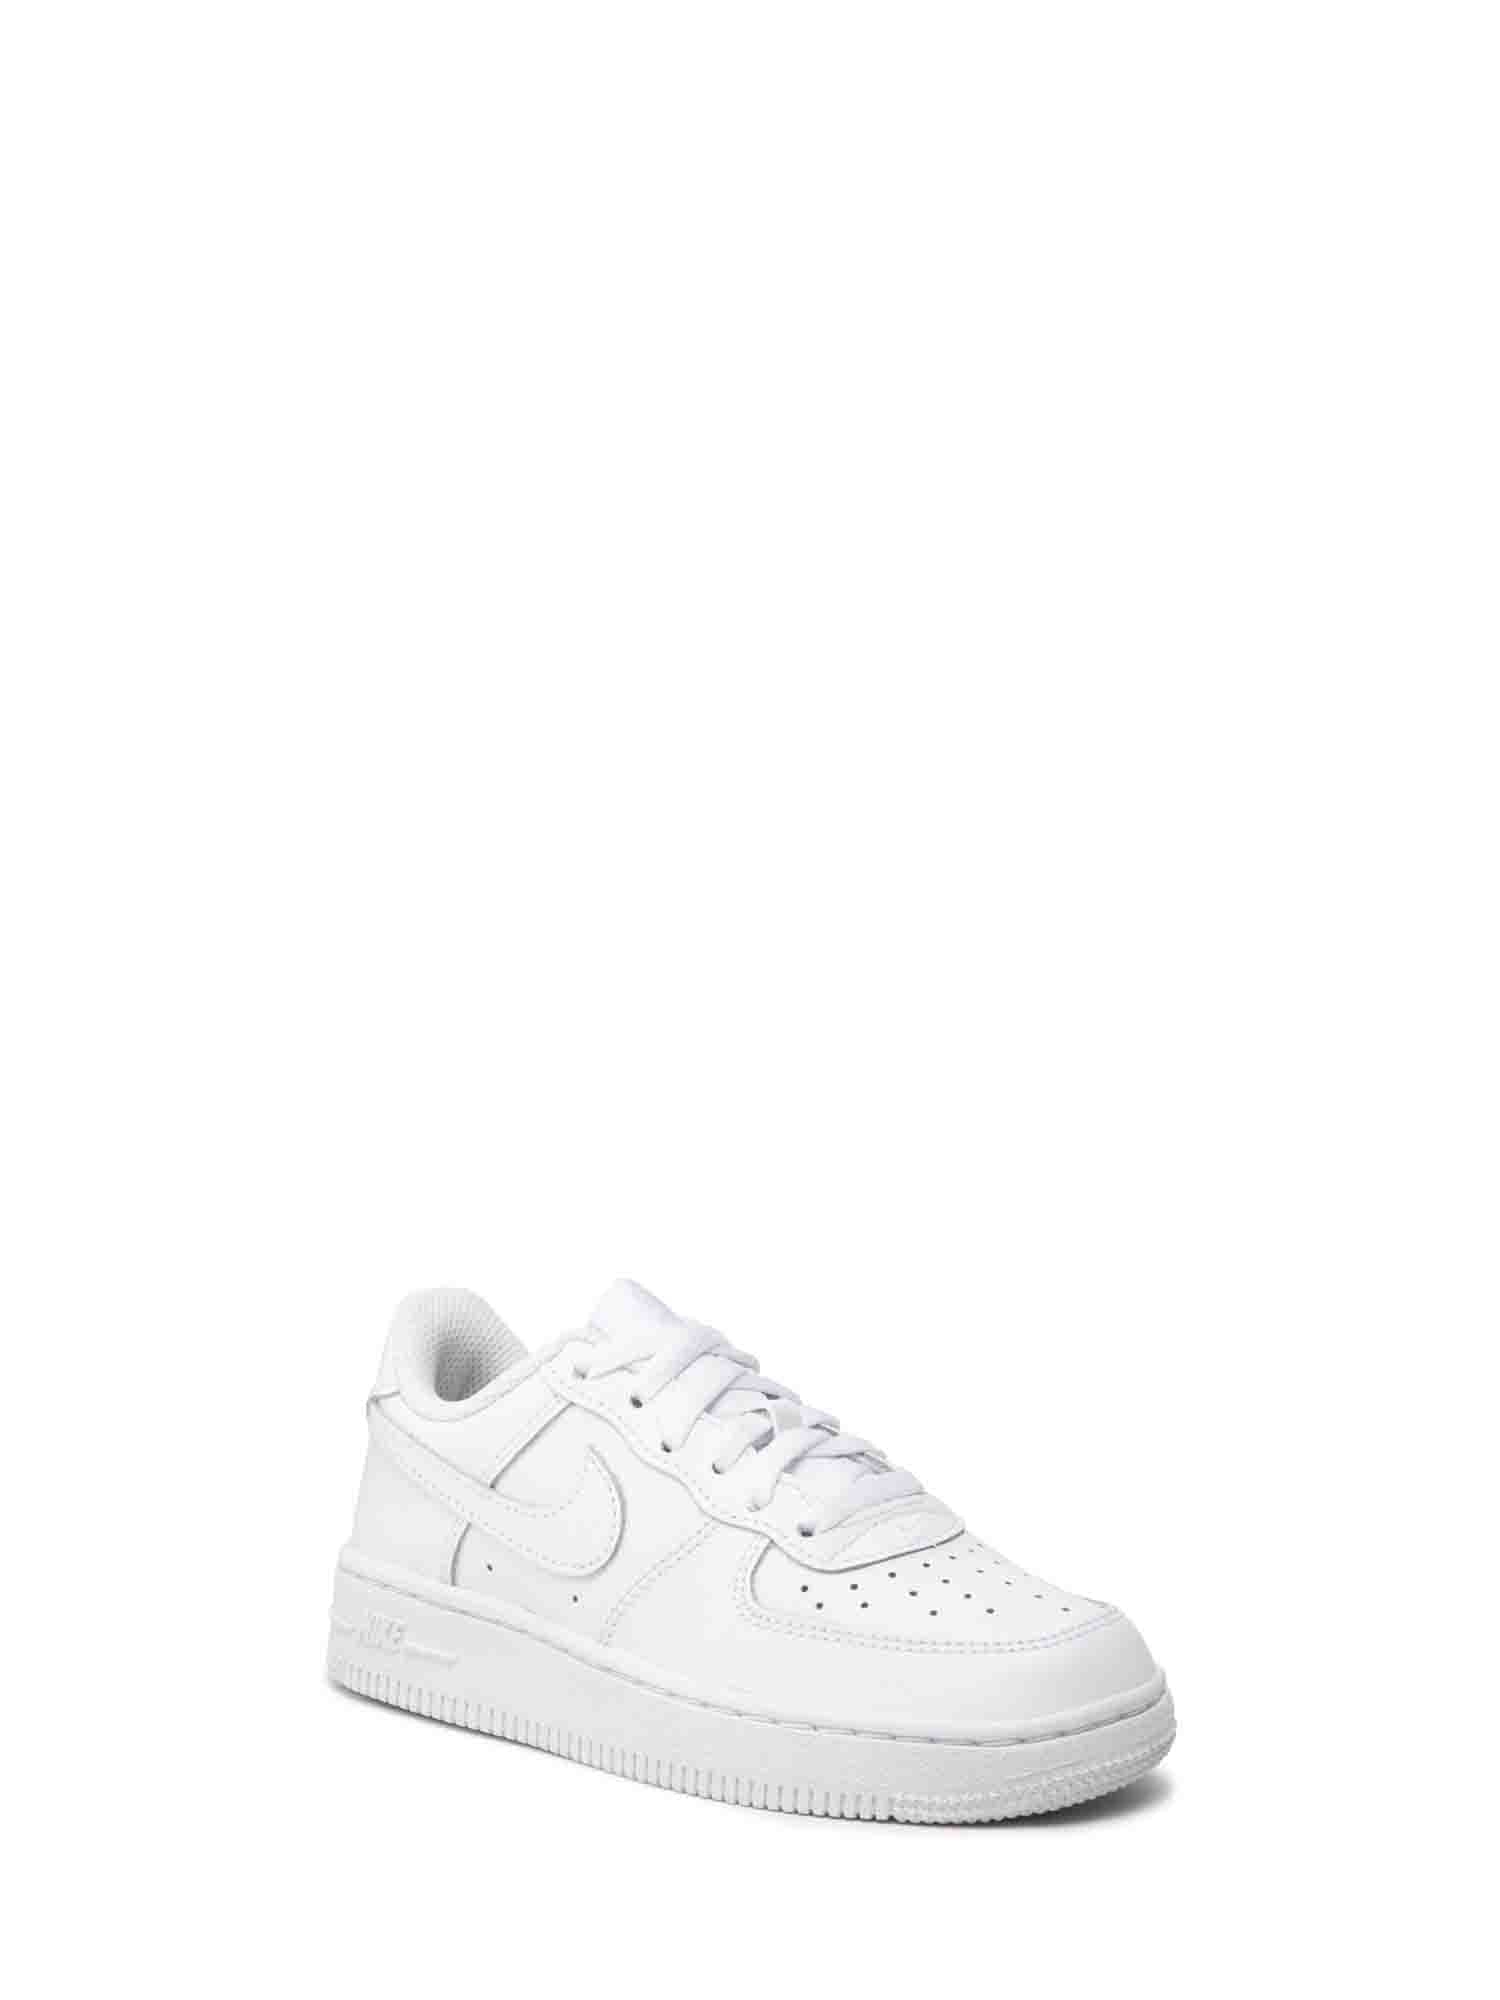 NIKE AIR FORCE 1LE PS SNEAKERS BAMBINO BIANCO